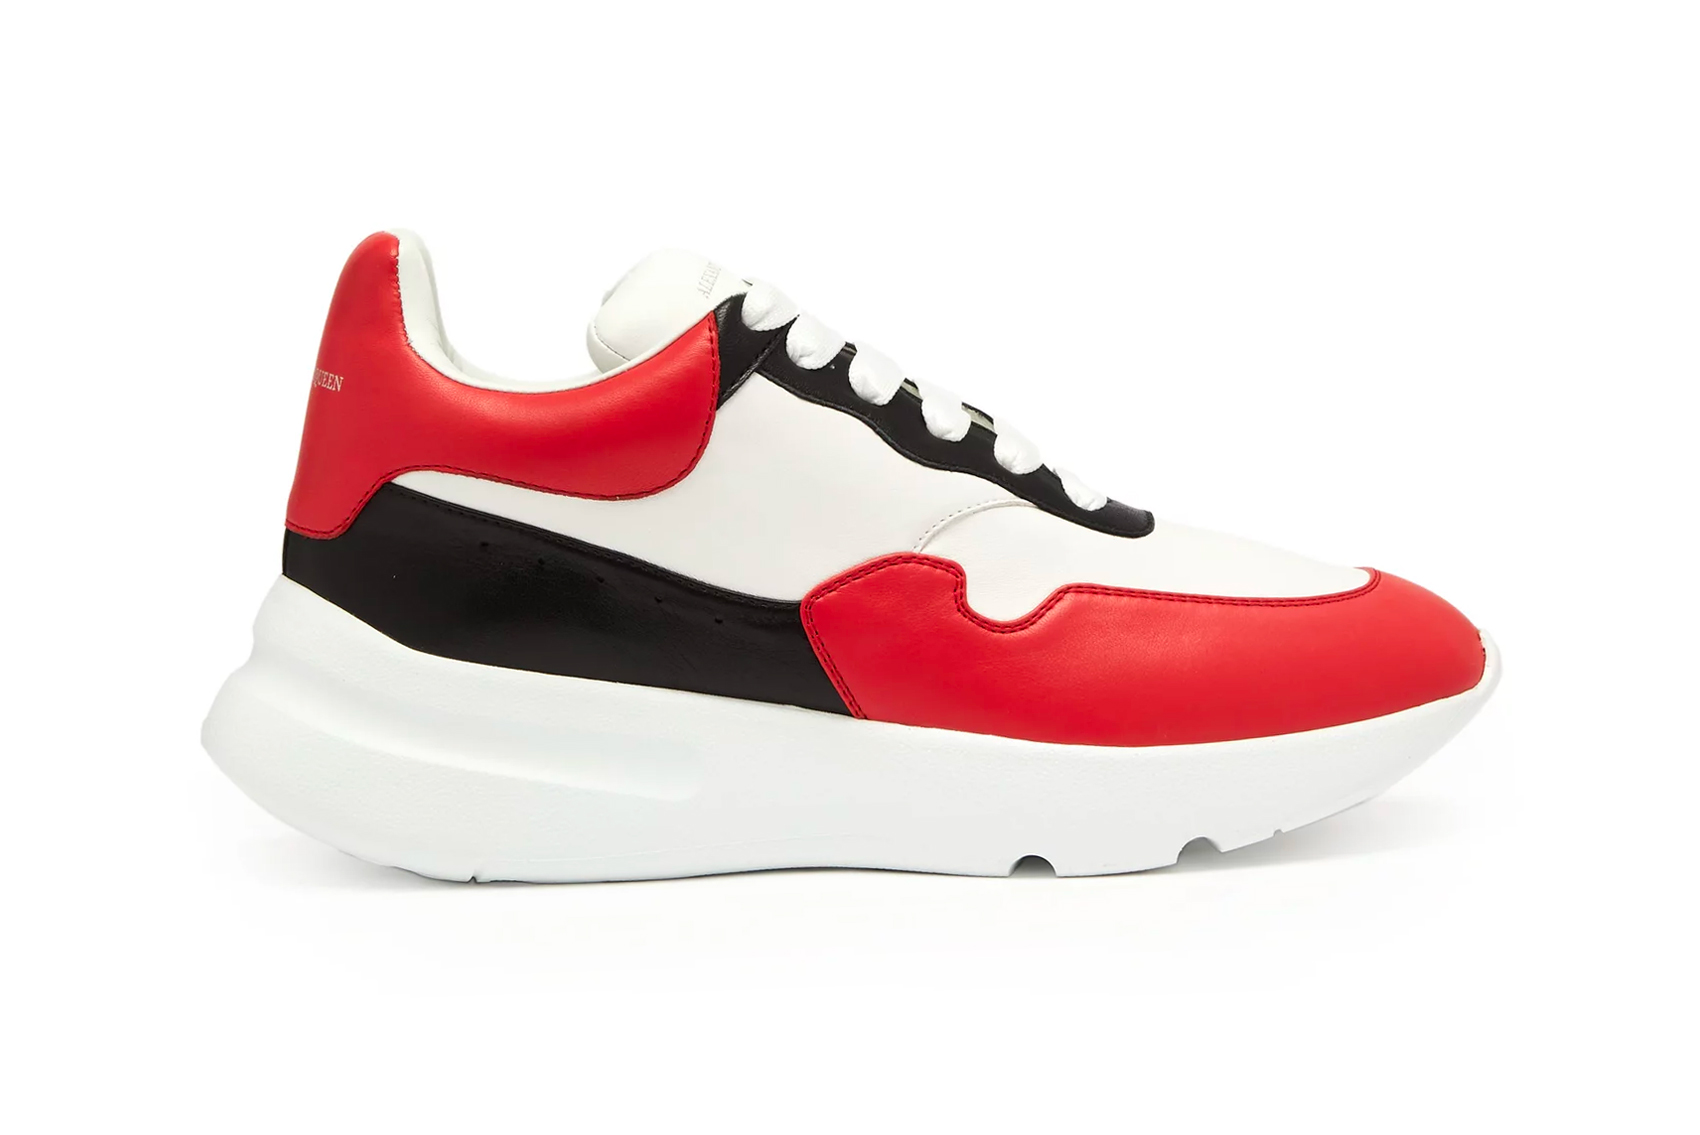 alexander mcqueen shoes red white